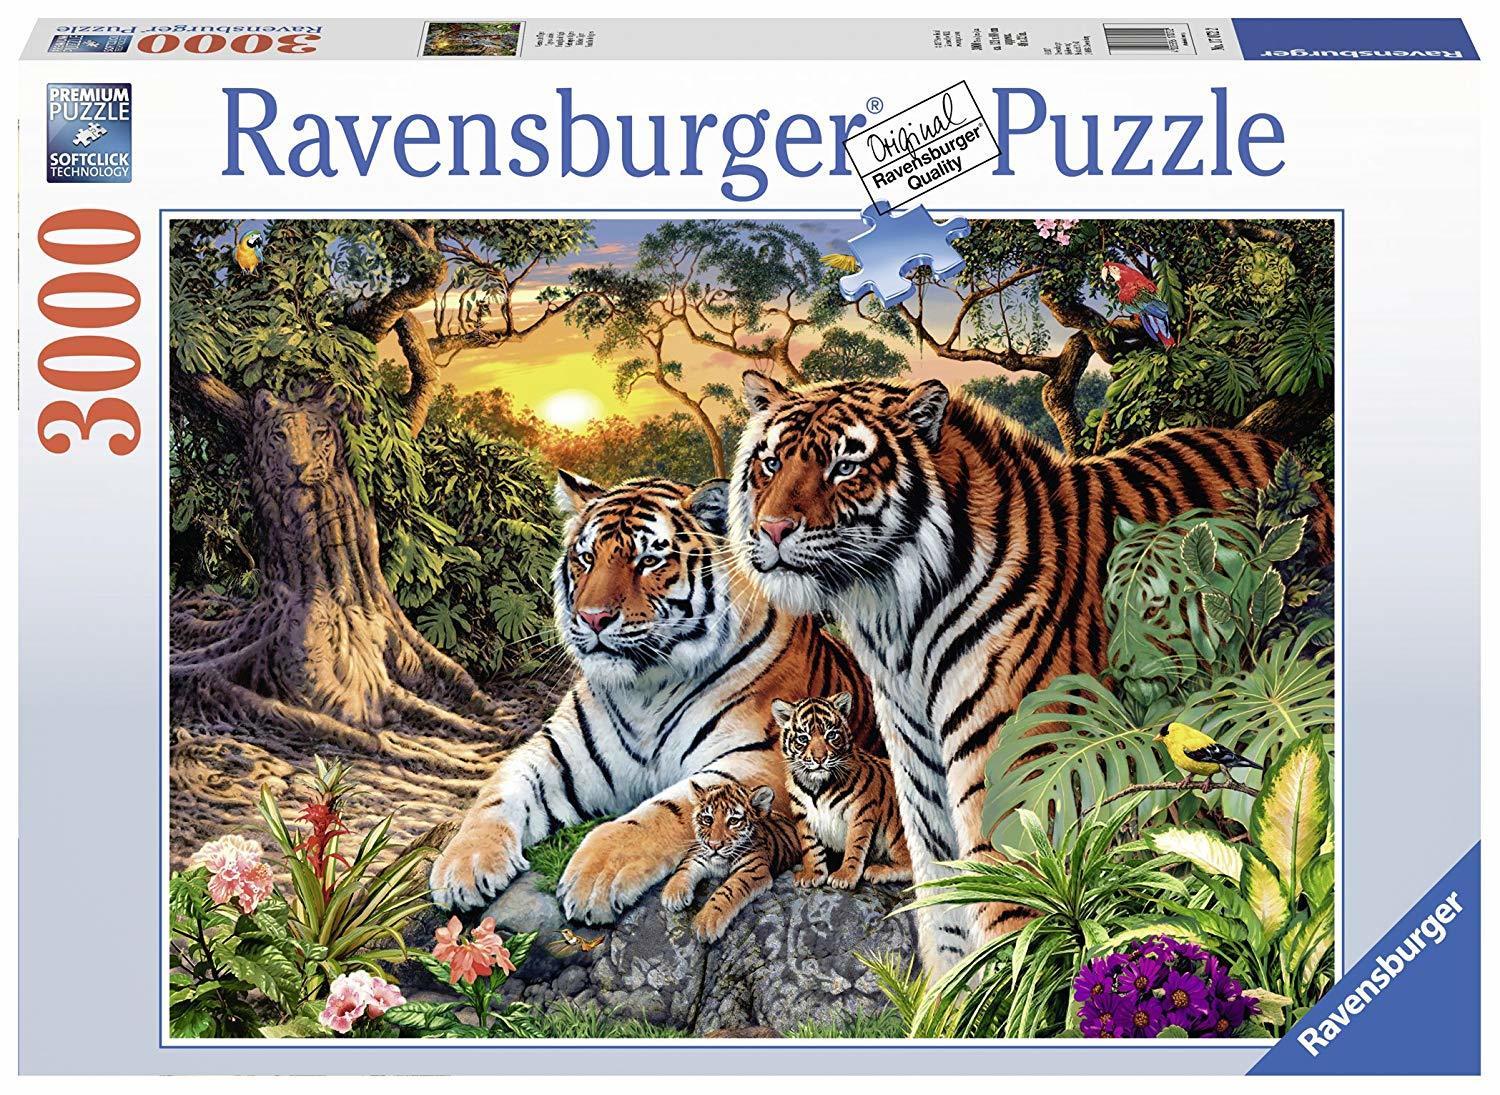 Puzzle Treasures of the Great Outdoors - 3000 pièces -Bluebird-Puzzle -70581-P